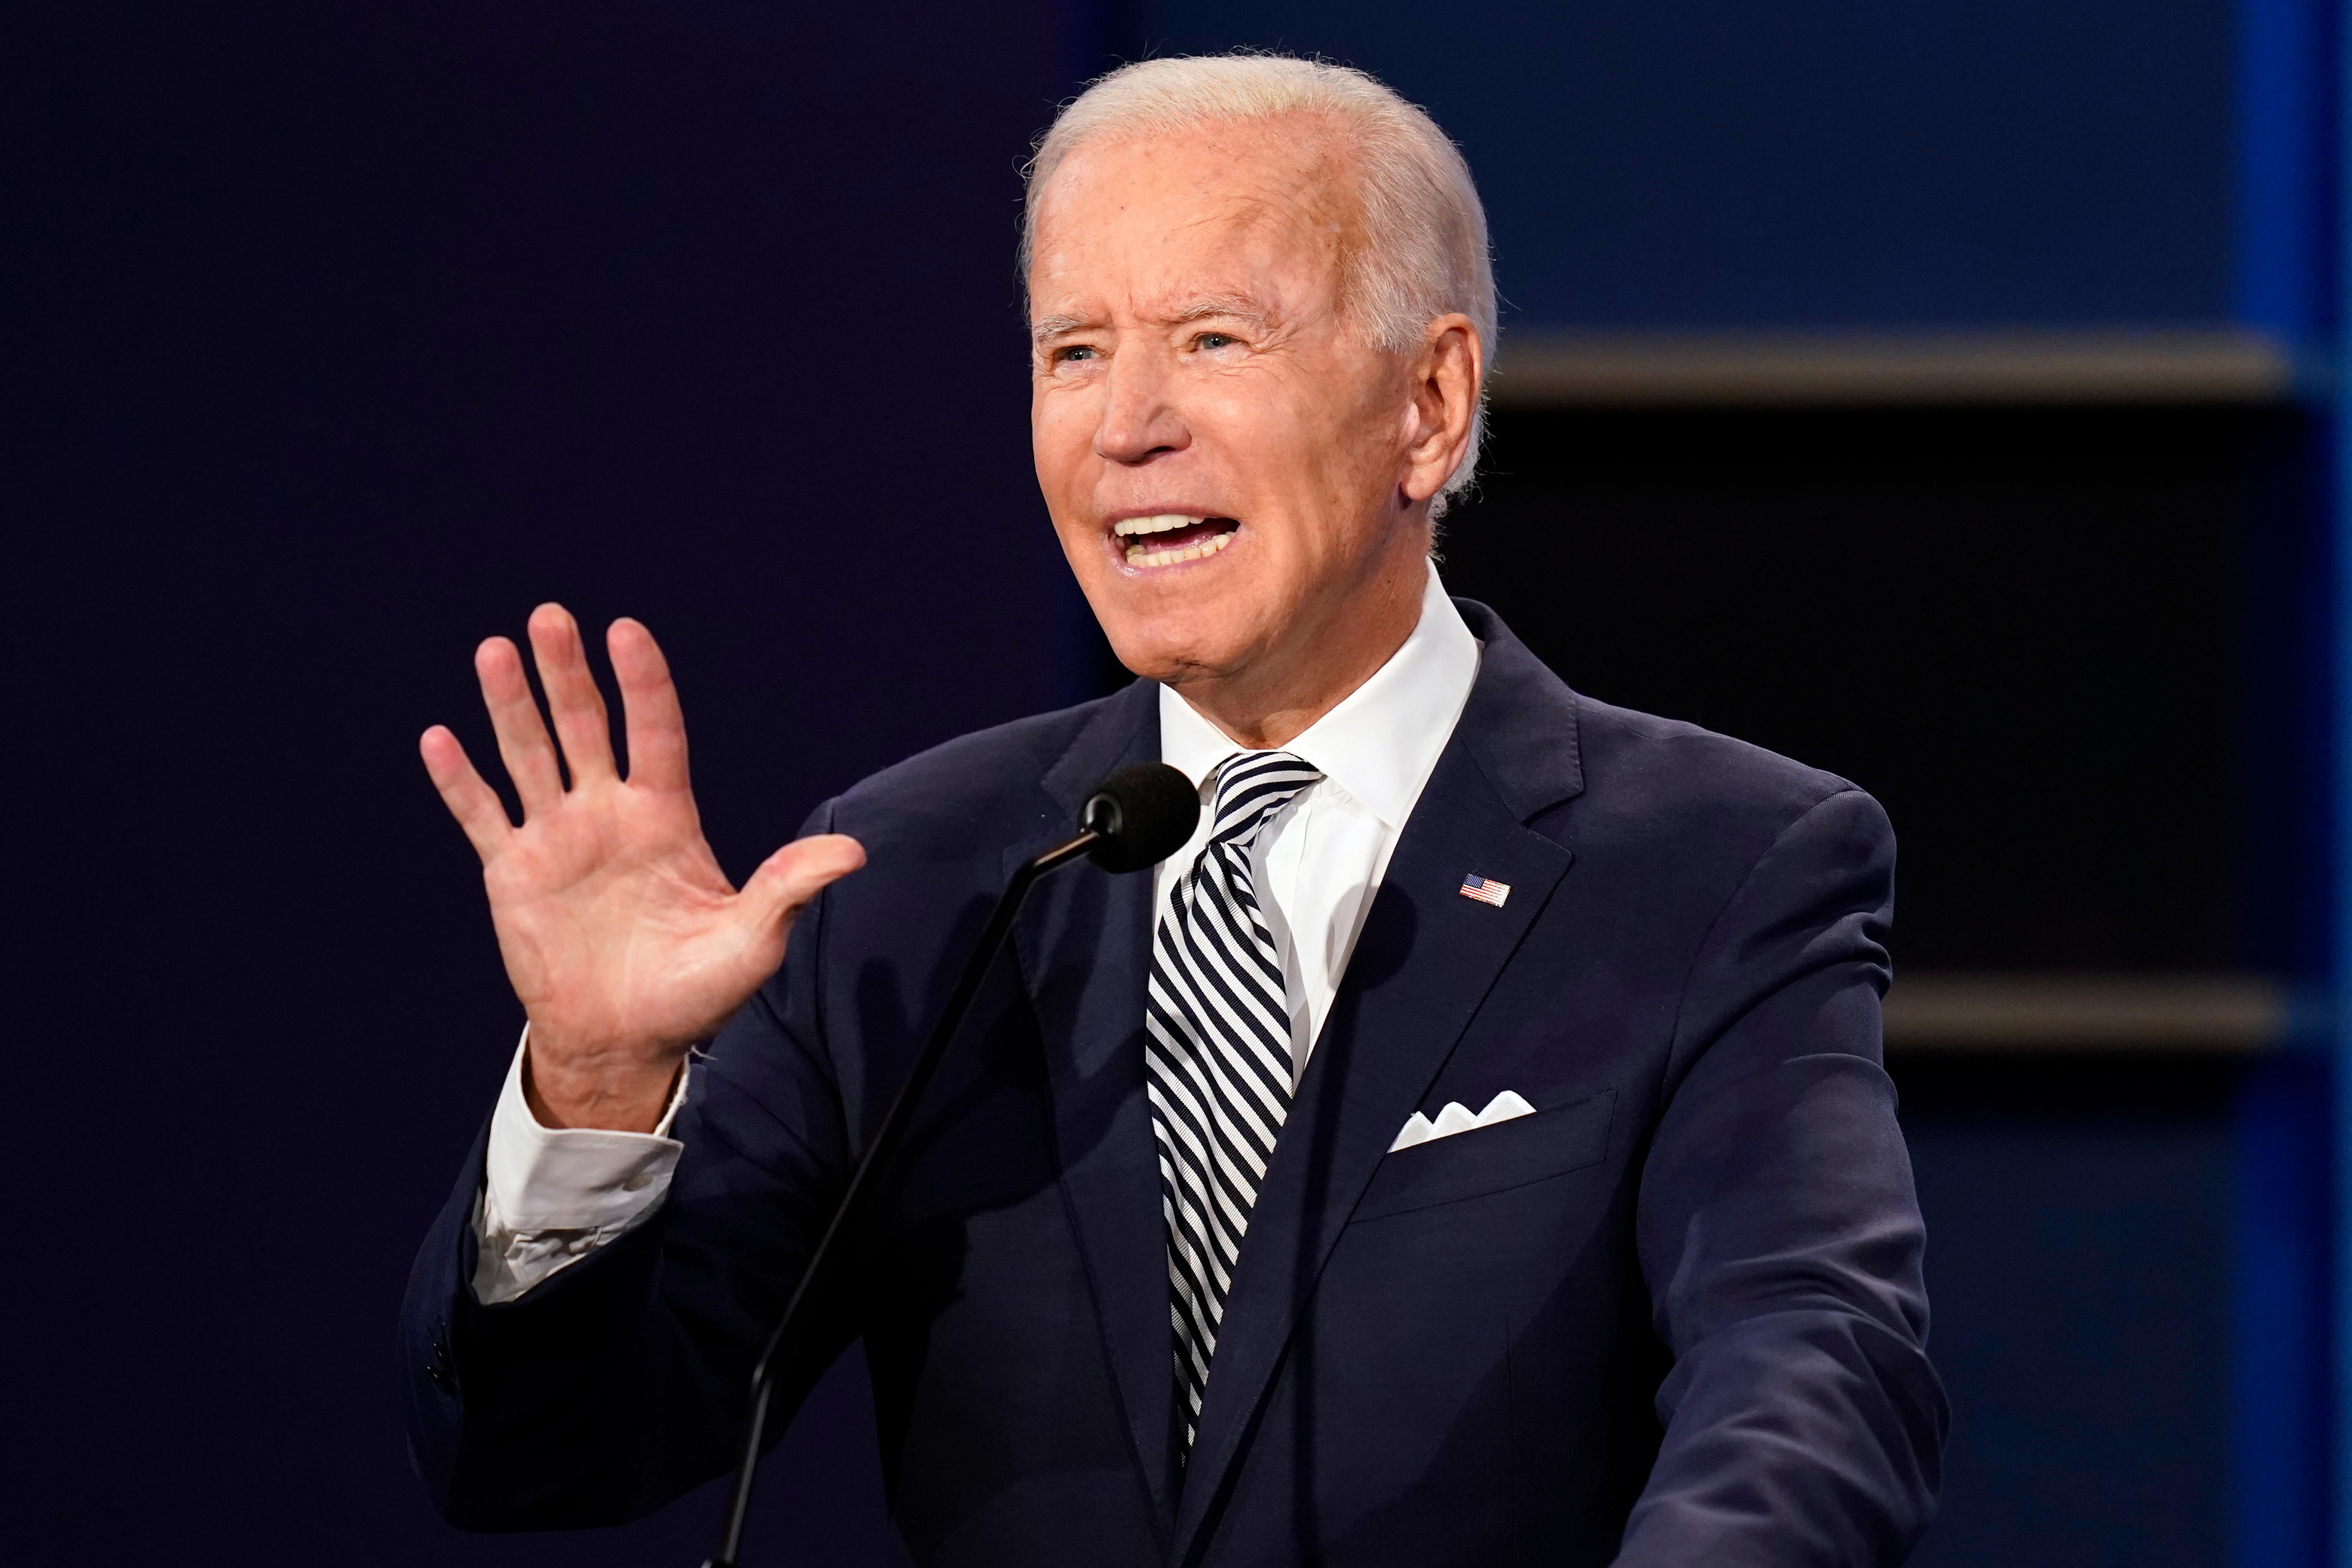 Democratic presidential candidate former Vice President Joe Biden speaks during the first presidential debate with President Donald Trump Tuesday, Sept. 29, 2020, at Case Western University and Cleveland Clinic, in Cleveland, Ohio. (AP Photo/Patrick Semansky)